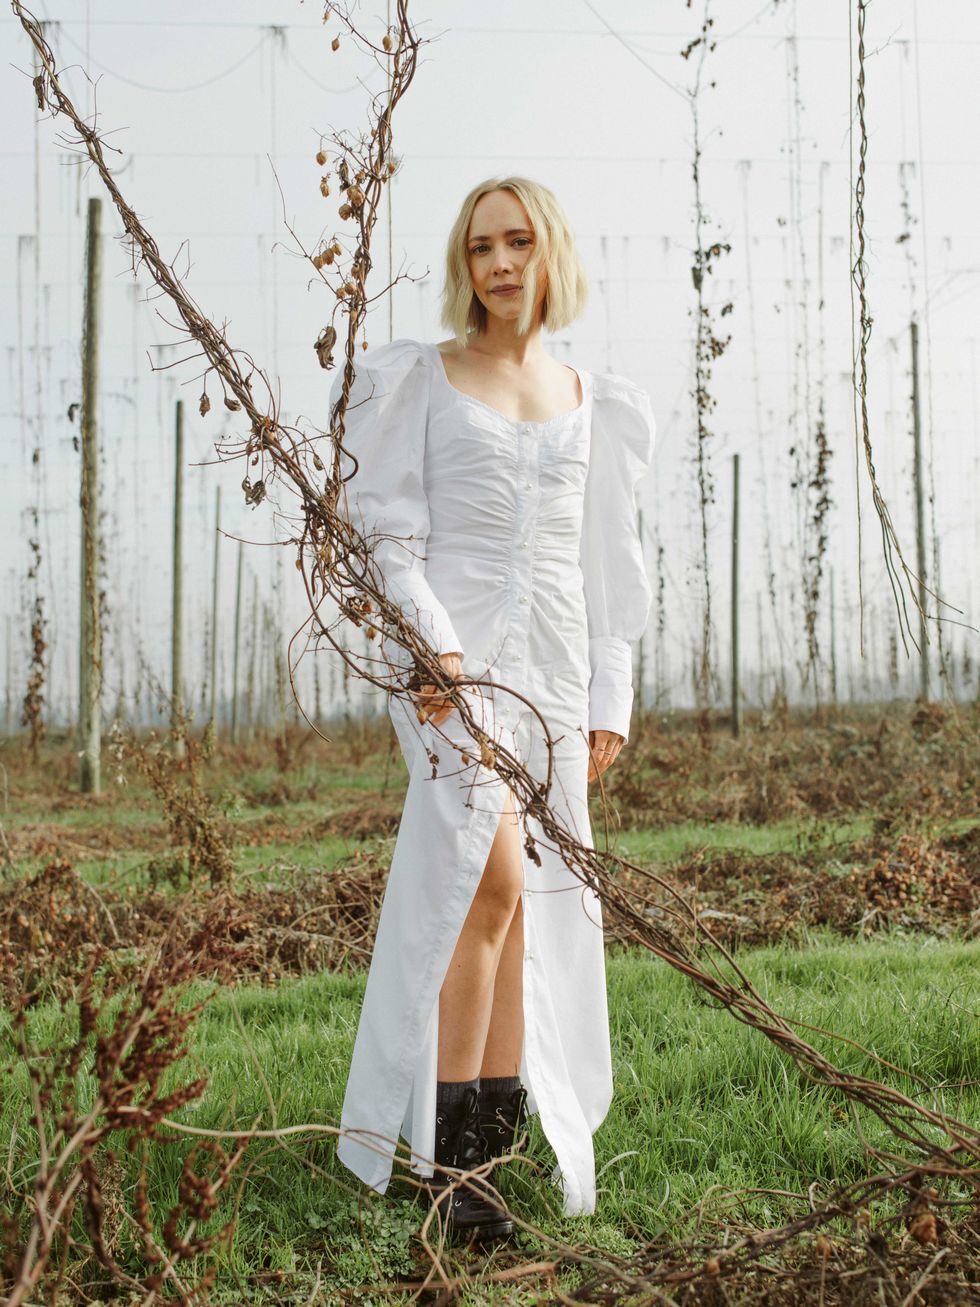 People in nature, Clothing, Tree, Beauty, Long hair, Dress, Grass, Fashion, Blond, Photography, 